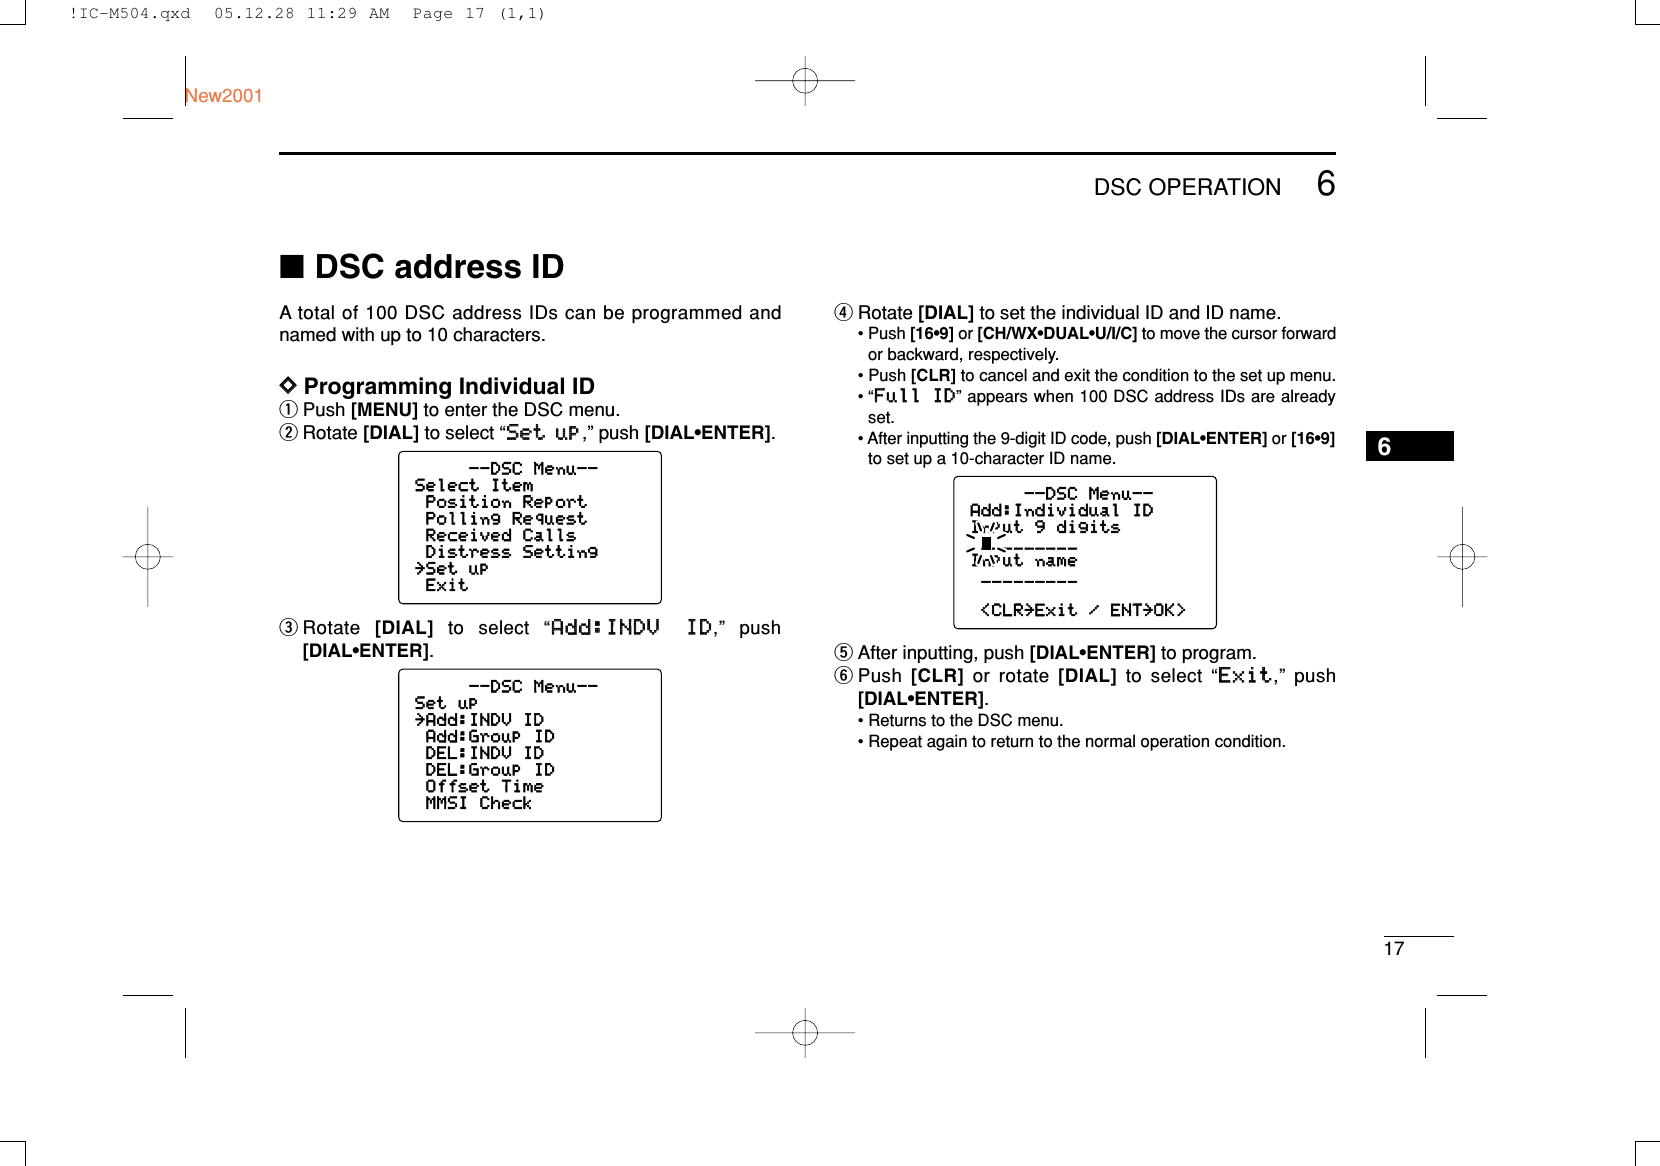 176DSC OPERATIONNew20016■DSC address IDA total of 100 DSC address IDs can be programmed andnamed with up to 10 characters.DDProgramming Individual IDqPush [MENU] to enter the DSC menu.wRotate [DIAL] to select “SSeett uupp,” push [DIAL•ENTER].eRotate  [DIAL]to select “AAdddd::IINNDDVV IIDD,” push [DIAL•ENTER].rRotate [DIAL]to set the individual ID and ID name.• Push [16•9] or [CH/WX•DUAL•U/I/C] to move the cursor forwardor backward, respectively.• Push [CLR] to cancel and exit the condition to the set up menu.• “FFuullll IIDD” appears when 100 DSC address IDs are alreadyset.• After inputting the 9-digit ID code, push [DIAL•ENTER] or [16•9]to set up a 10-character ID name.tAfter inputting, push [DIAL•ENTER] to program.yPush  [CLR] or rotate [DIAL] to select “EExxiitt,” push [DIAL•ENTER].• Returns to the DSC menu.• Repeat again to return to the normal operation condition.--DSC Menu--Add:Individual IDInput 9 digits_________Input name_________&lt;CLR˘Exit / ENT˘OK&gt;--DSC Menu--Set up˘Add:INDV IDAdd:Group IDDEL:INDV IDDEL:Group IDOffset TimeMMSI Check--DSC Menu--Select ItemPosition ReportPolling RequestReceived CallsDistress Setting˘Set upExit!IC-M504.qxd  05.12.28 11:29 AM  Page 17 (1,1)